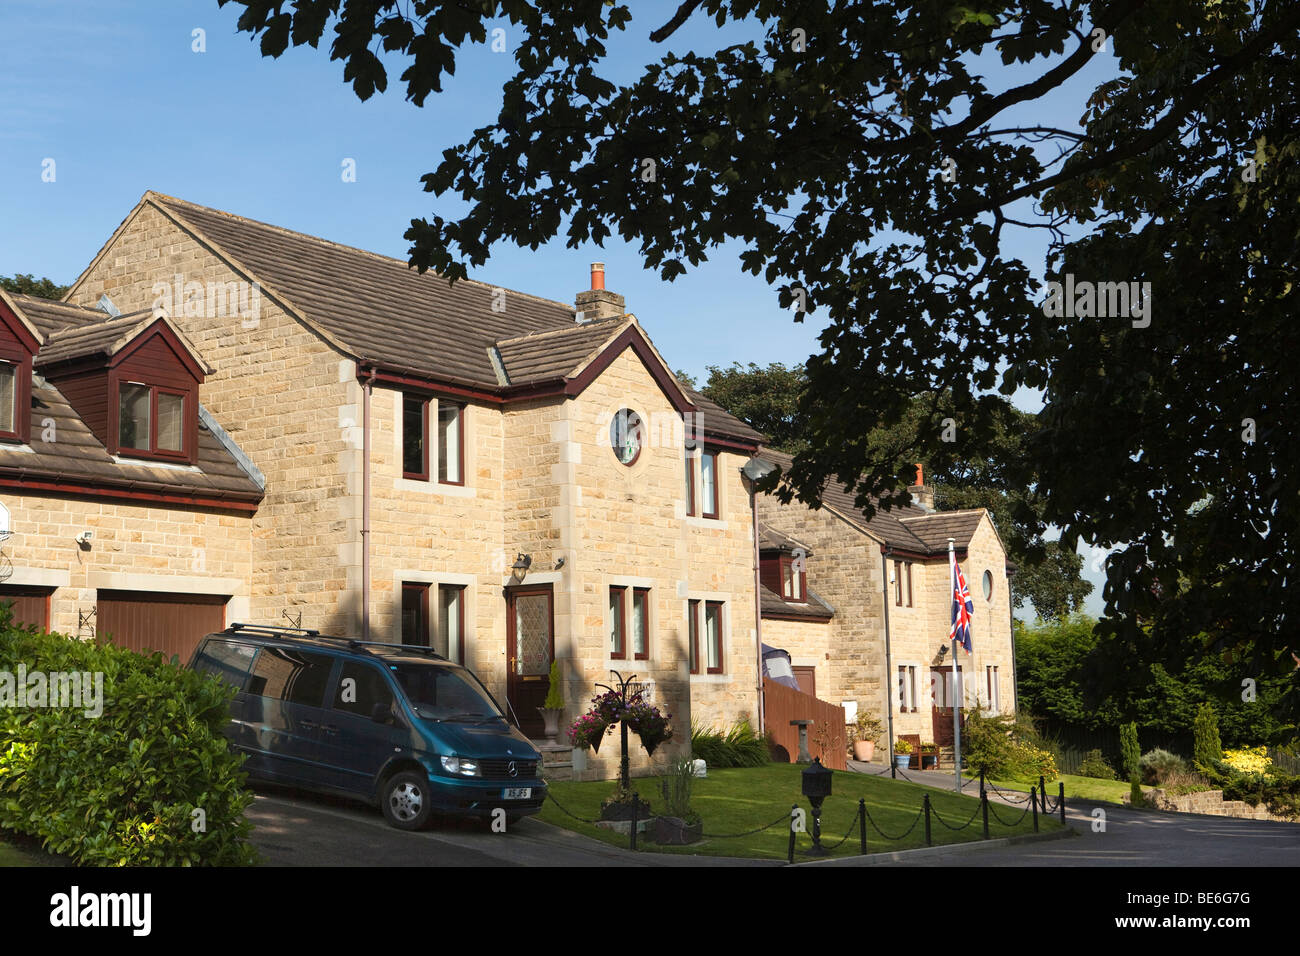 UK, England, Yorkshire, Haworth, new build houses constructed in local stone Stock Photo